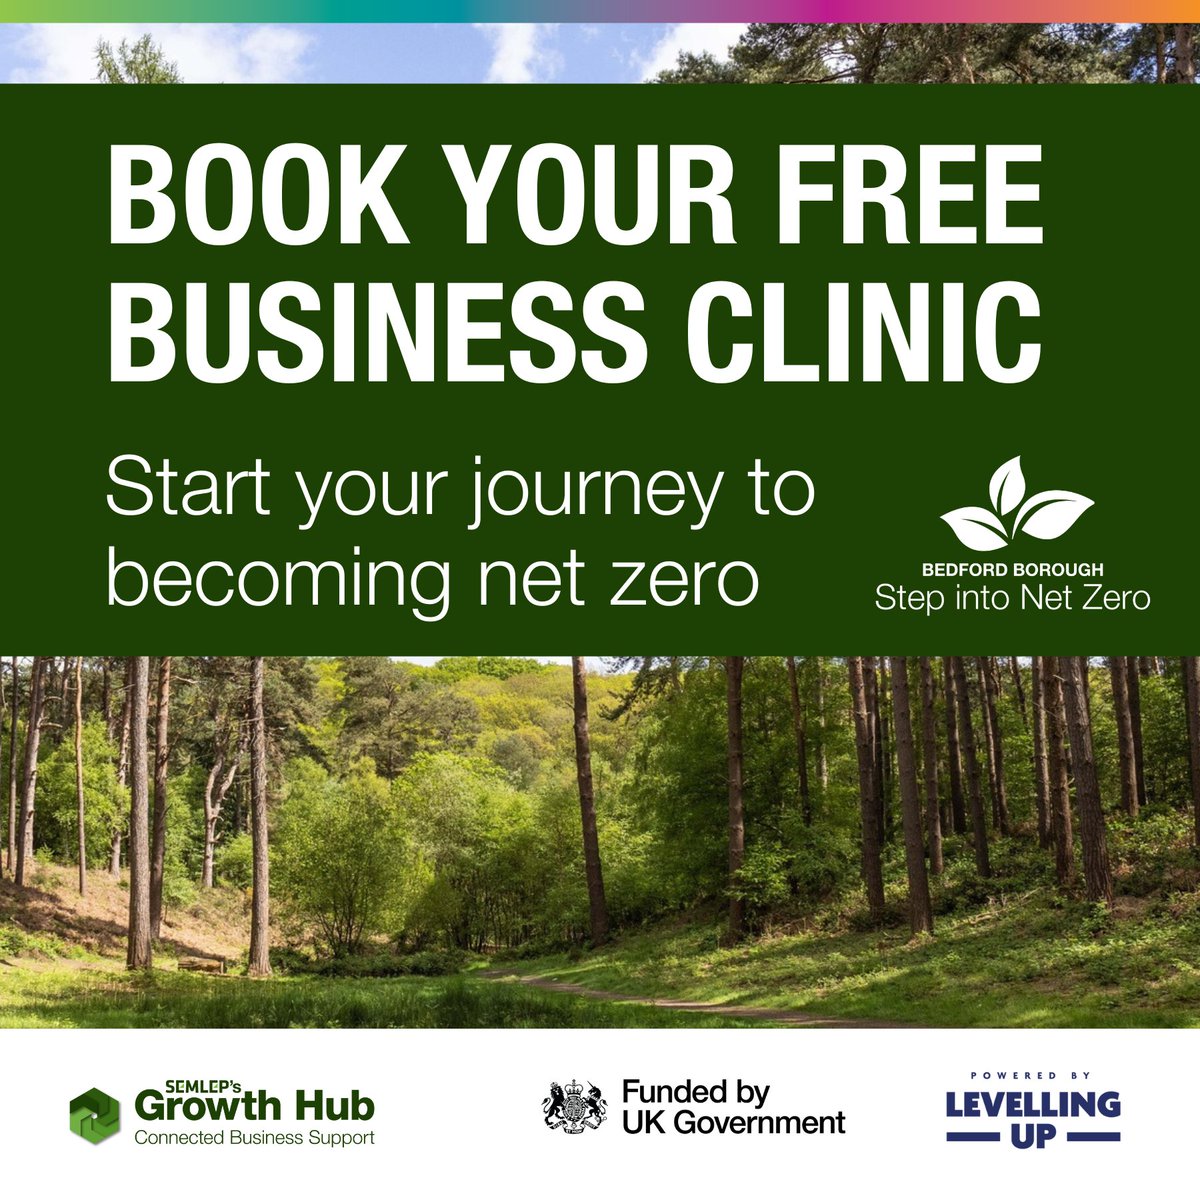 🌱 Book your FREE 30-minute business clinic and start your #NetZero journey today: semlepgrowthhub.com/step-into-net-… Through business clinics, workshops and funding opportunities, 'Step into Net Zero' guides businesses across the #Bedford Borough region along their pathway to net zero.